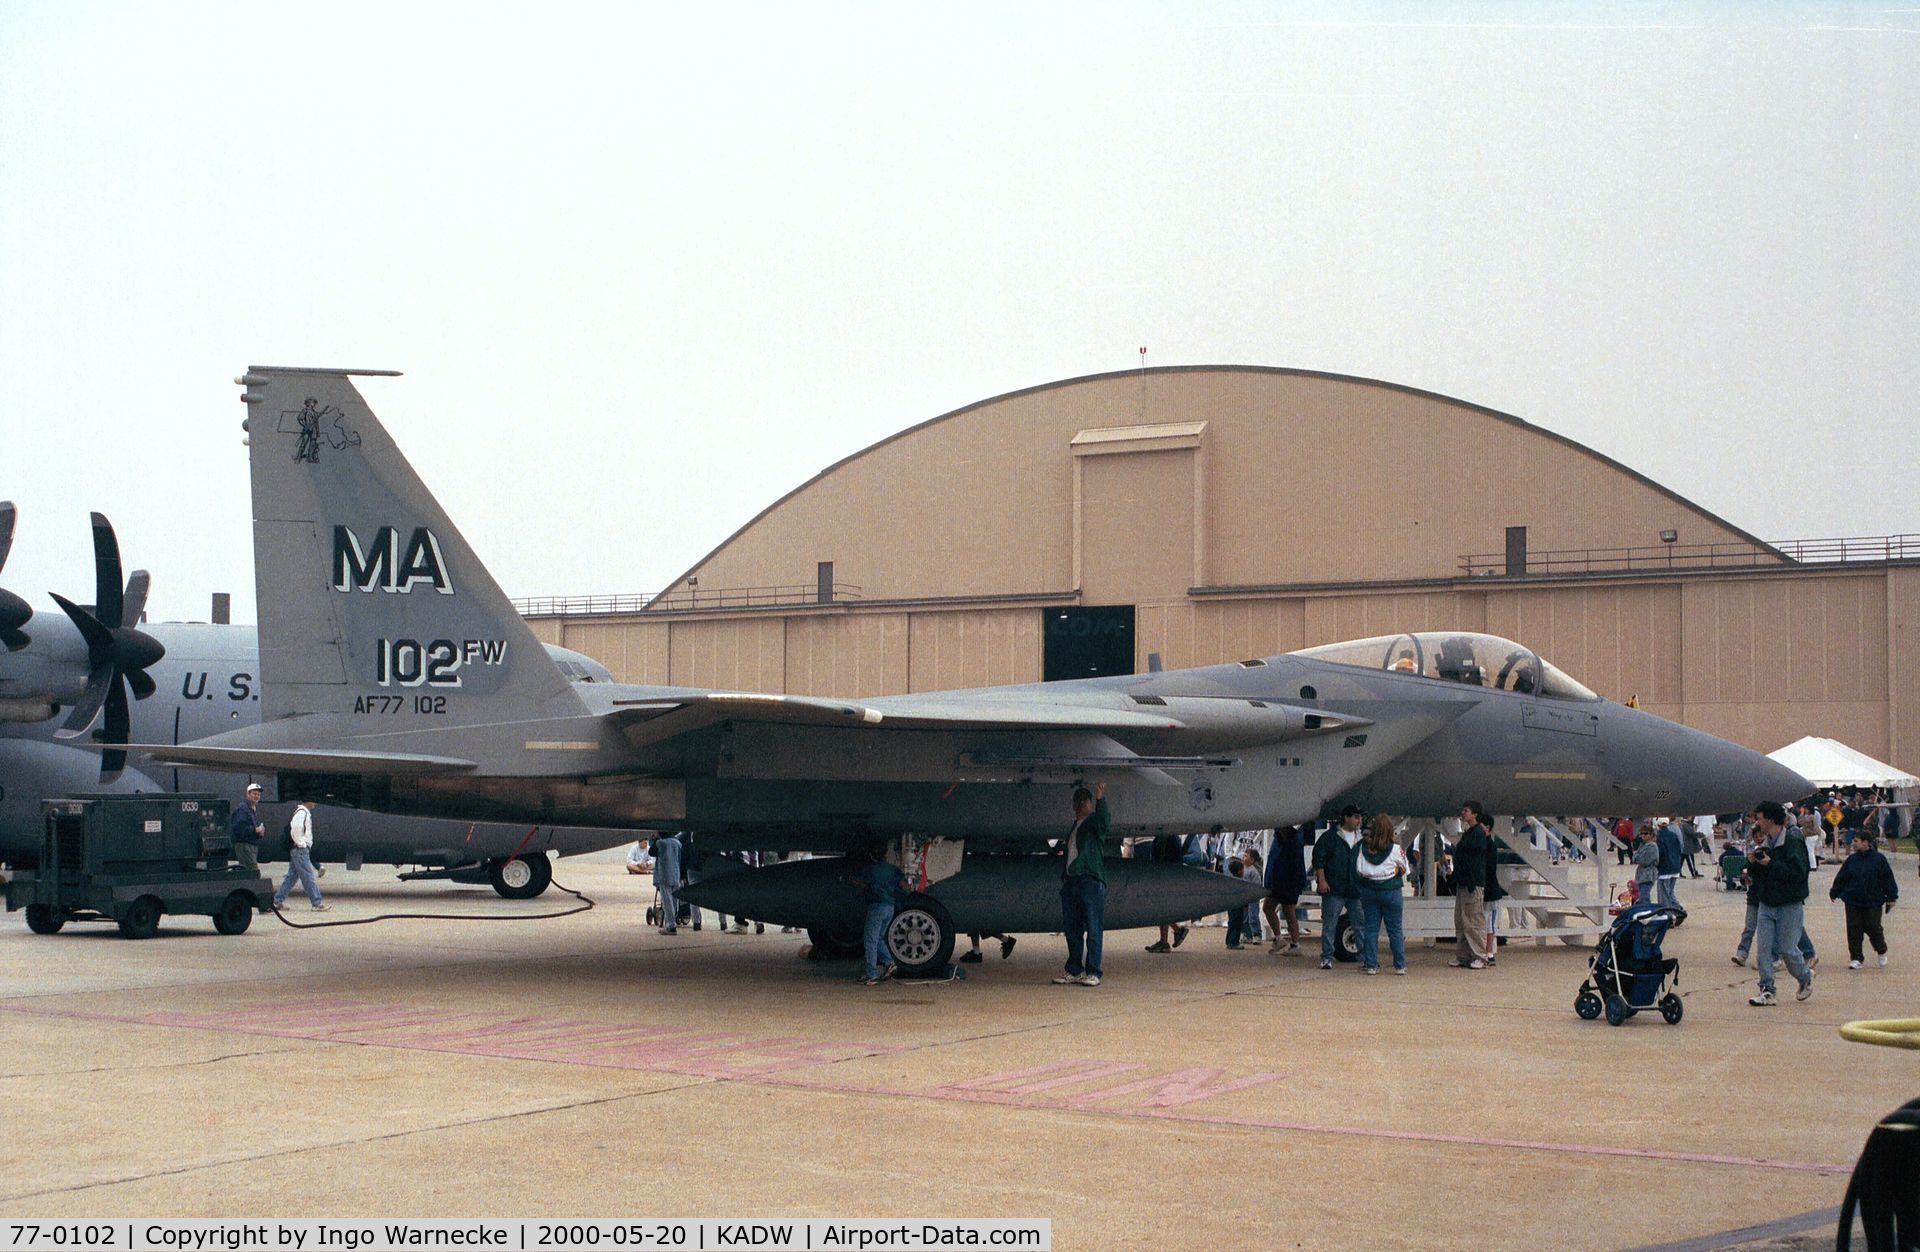 77-0102, 1977 McDonnell Douglas F-15A Eagle C/N 0385/A314, McDonnell Douglas F-15A Eagle of the MA ANG at Andrews AFB during Armed Forces Day 2000